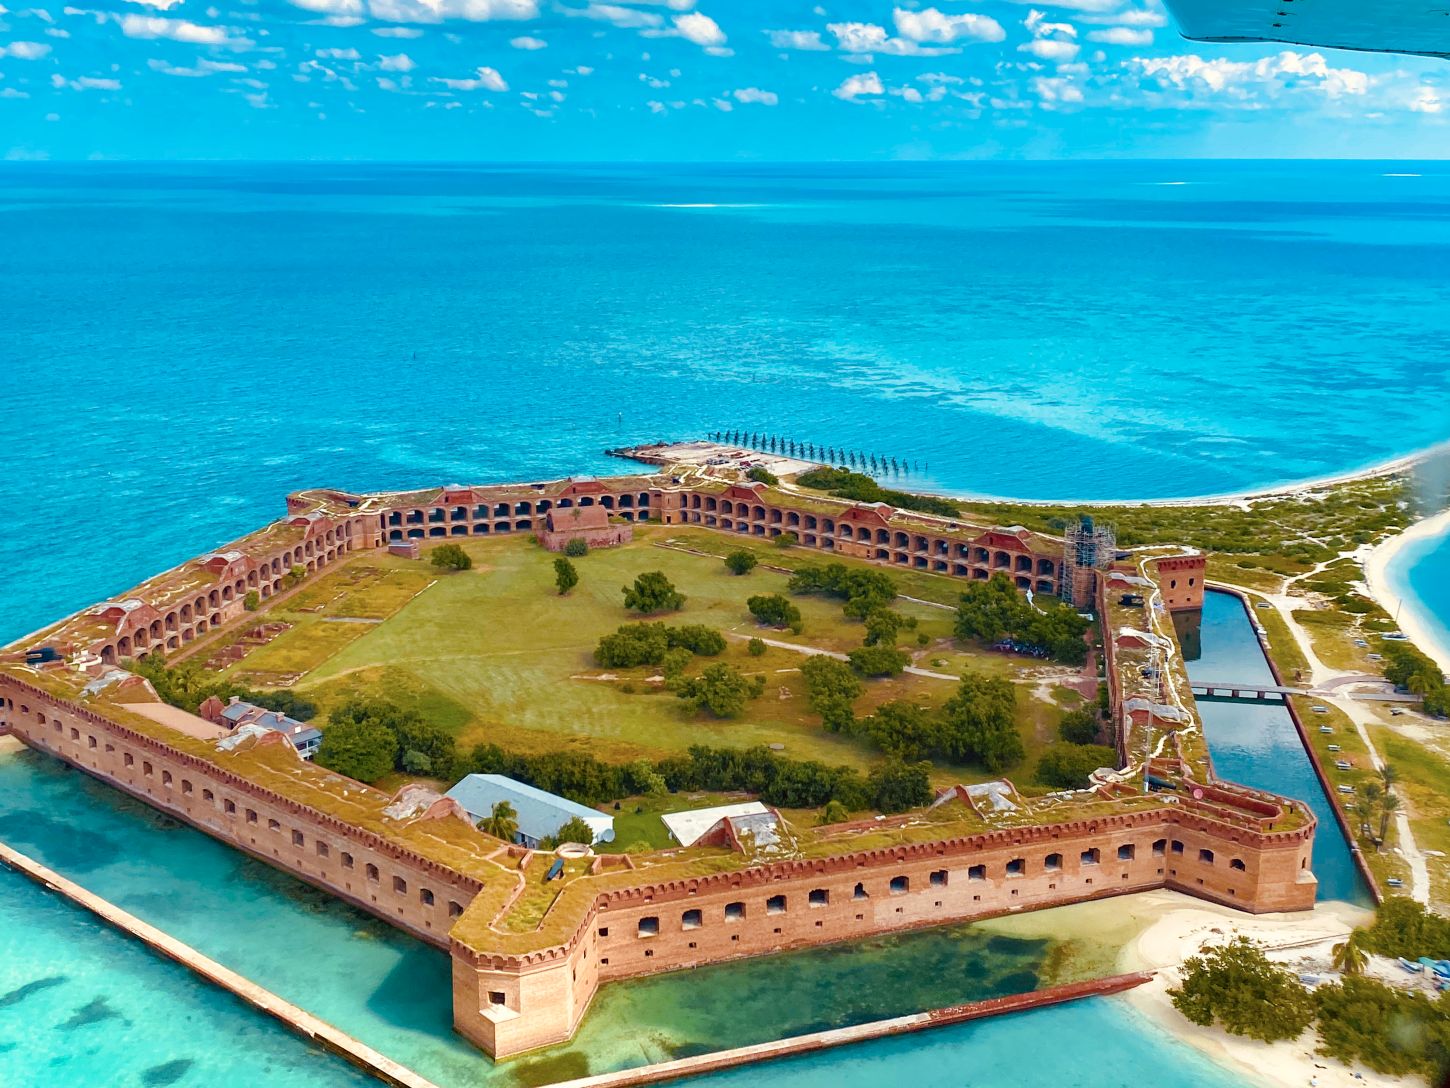 Fort Jefferson - Dry Tortugas N.P.